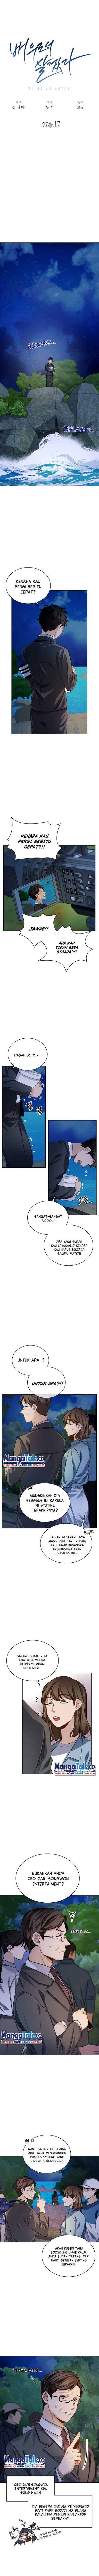 Be the Actor Chapter 17 Bahasa Indonesia